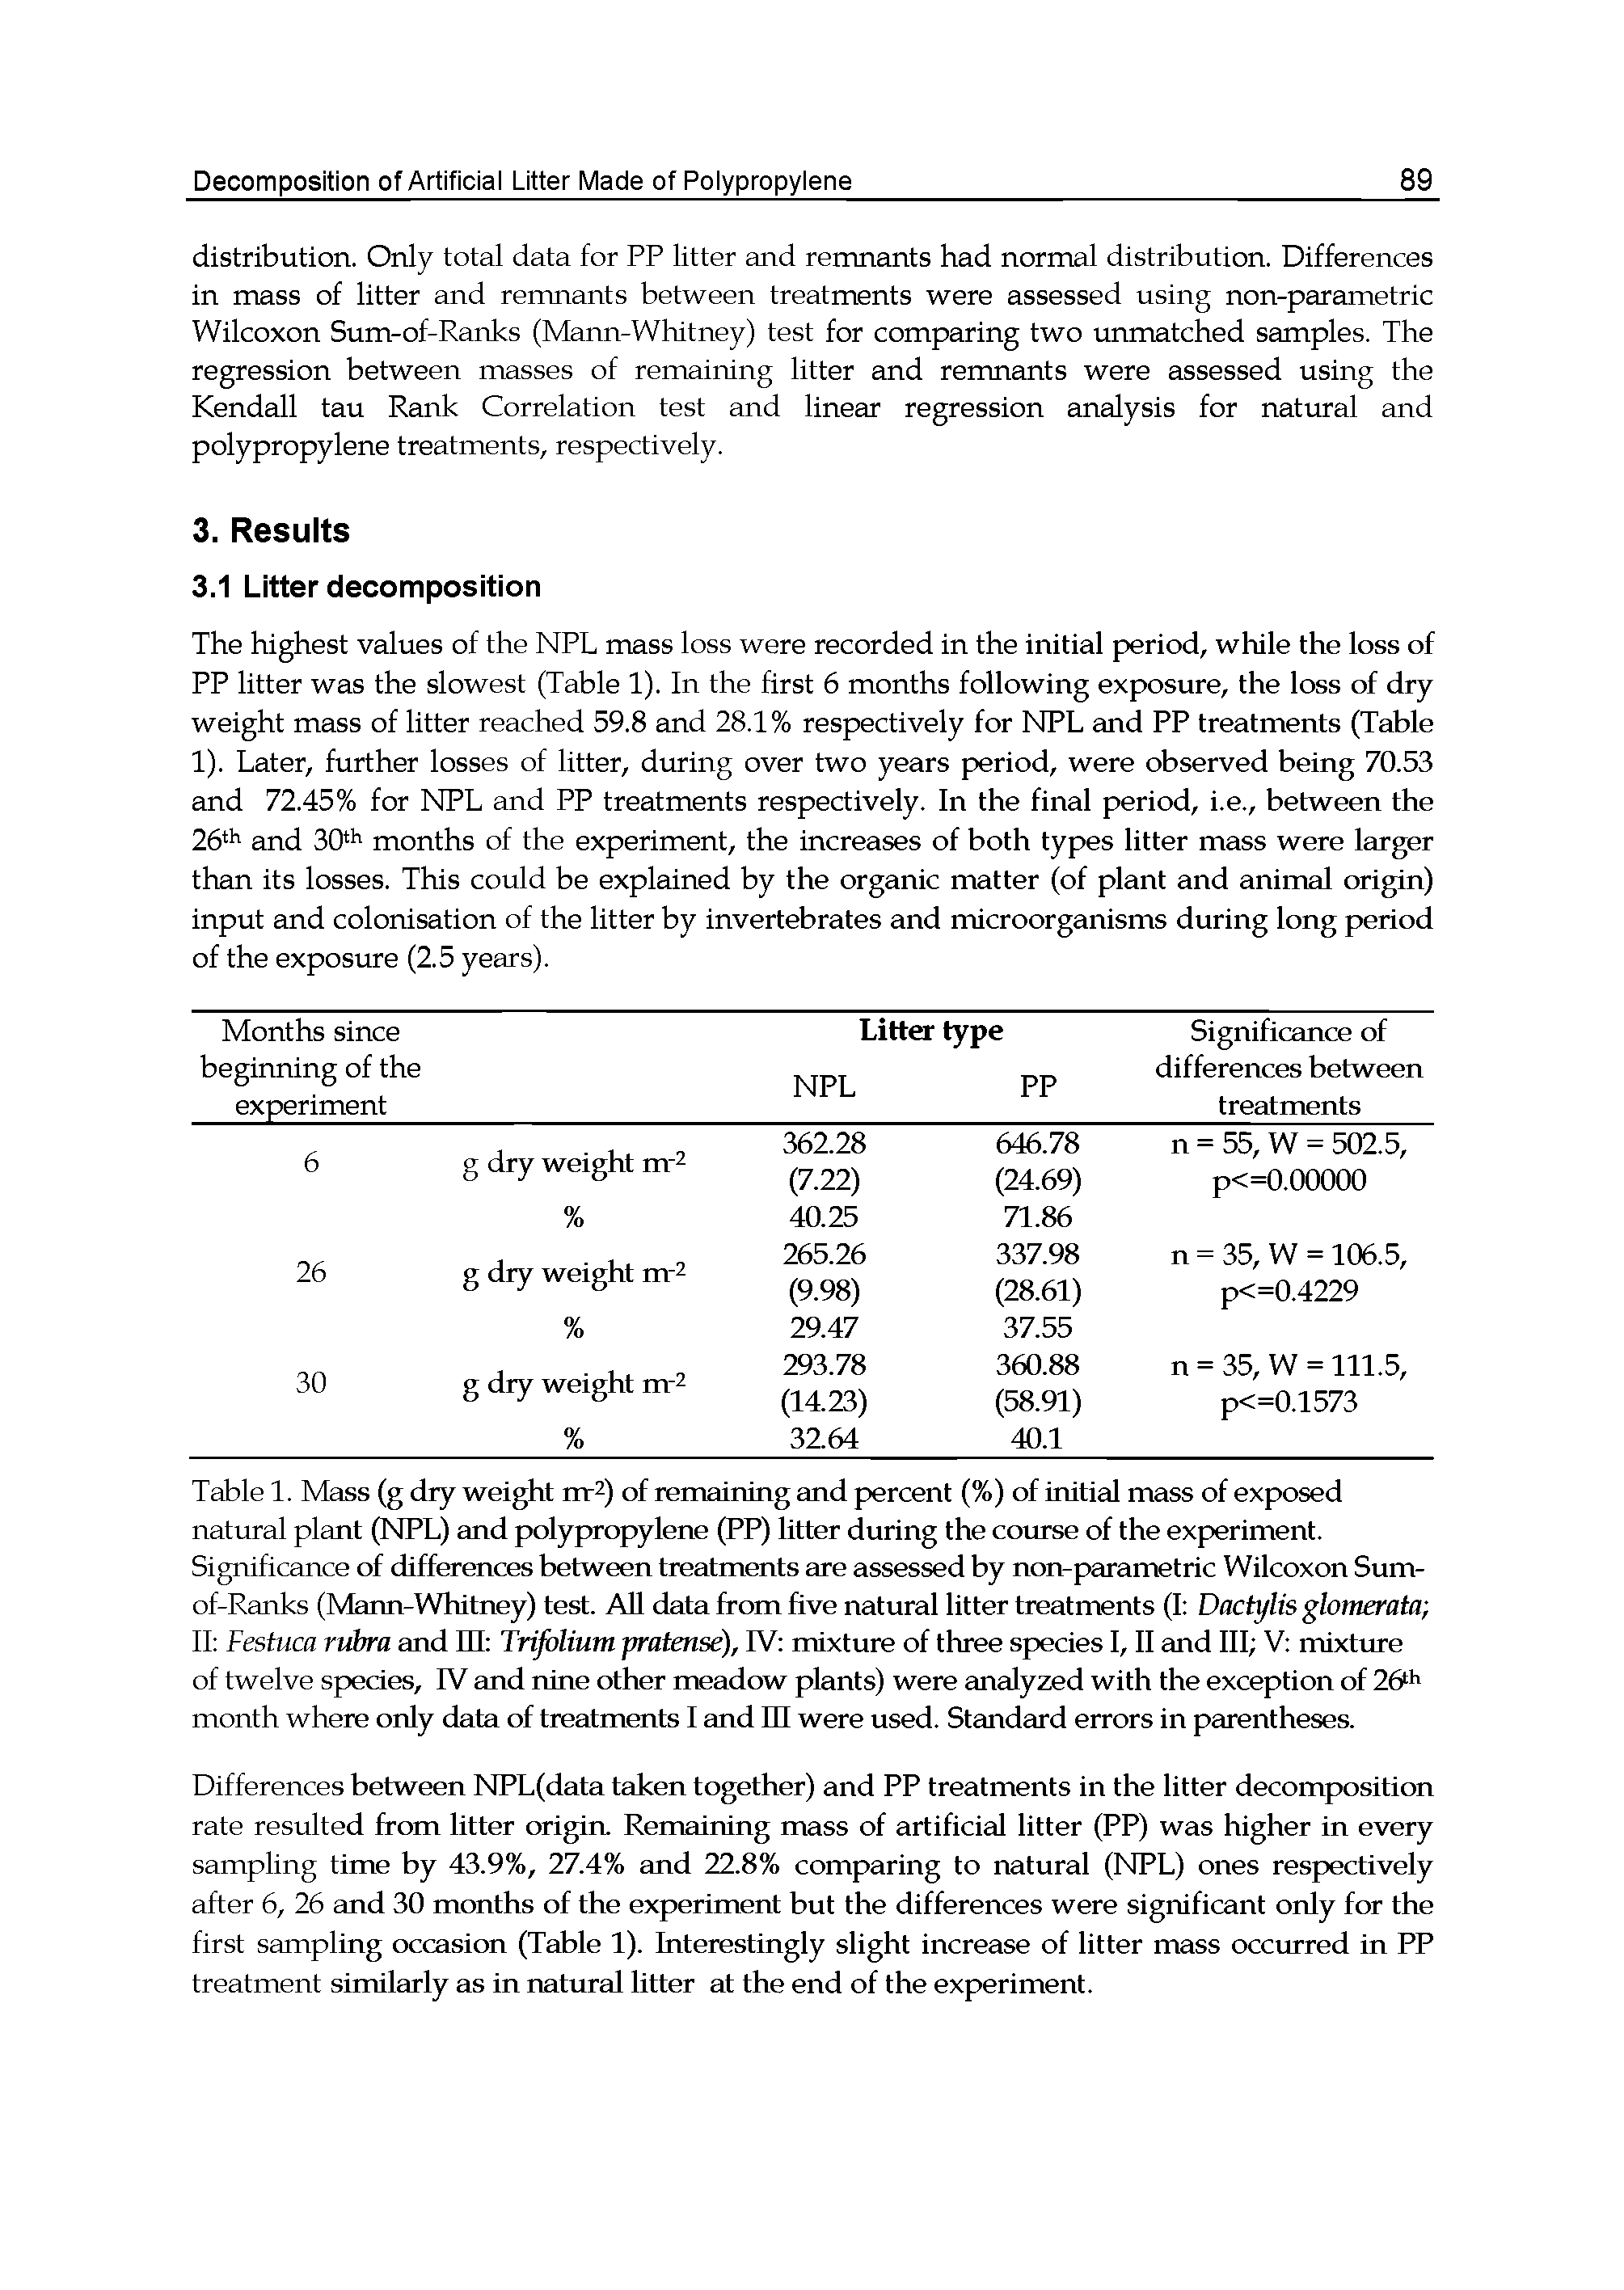 Table 1. Mass (g diy weight m-2) of remaining and percent (%) of initial mass of exposed natural plant (NPL) and polypropylene (PP) litter during the course of the experiment. Significance of differences between treatments are assessed by non-parametric Wilcoxon Sum-of-Ranks (Mann-Whitney) test. AH data from five natural litter treatments (I Dactylis glomerata II Festuca rubra and III Trijblium pratense), IV mixture of three species I, II and III V mixture of twelve species, IV and nine other meadow plants) were analyzed with the exception of month where only data of treatments I and HI were used. Standard errors in parentheses.